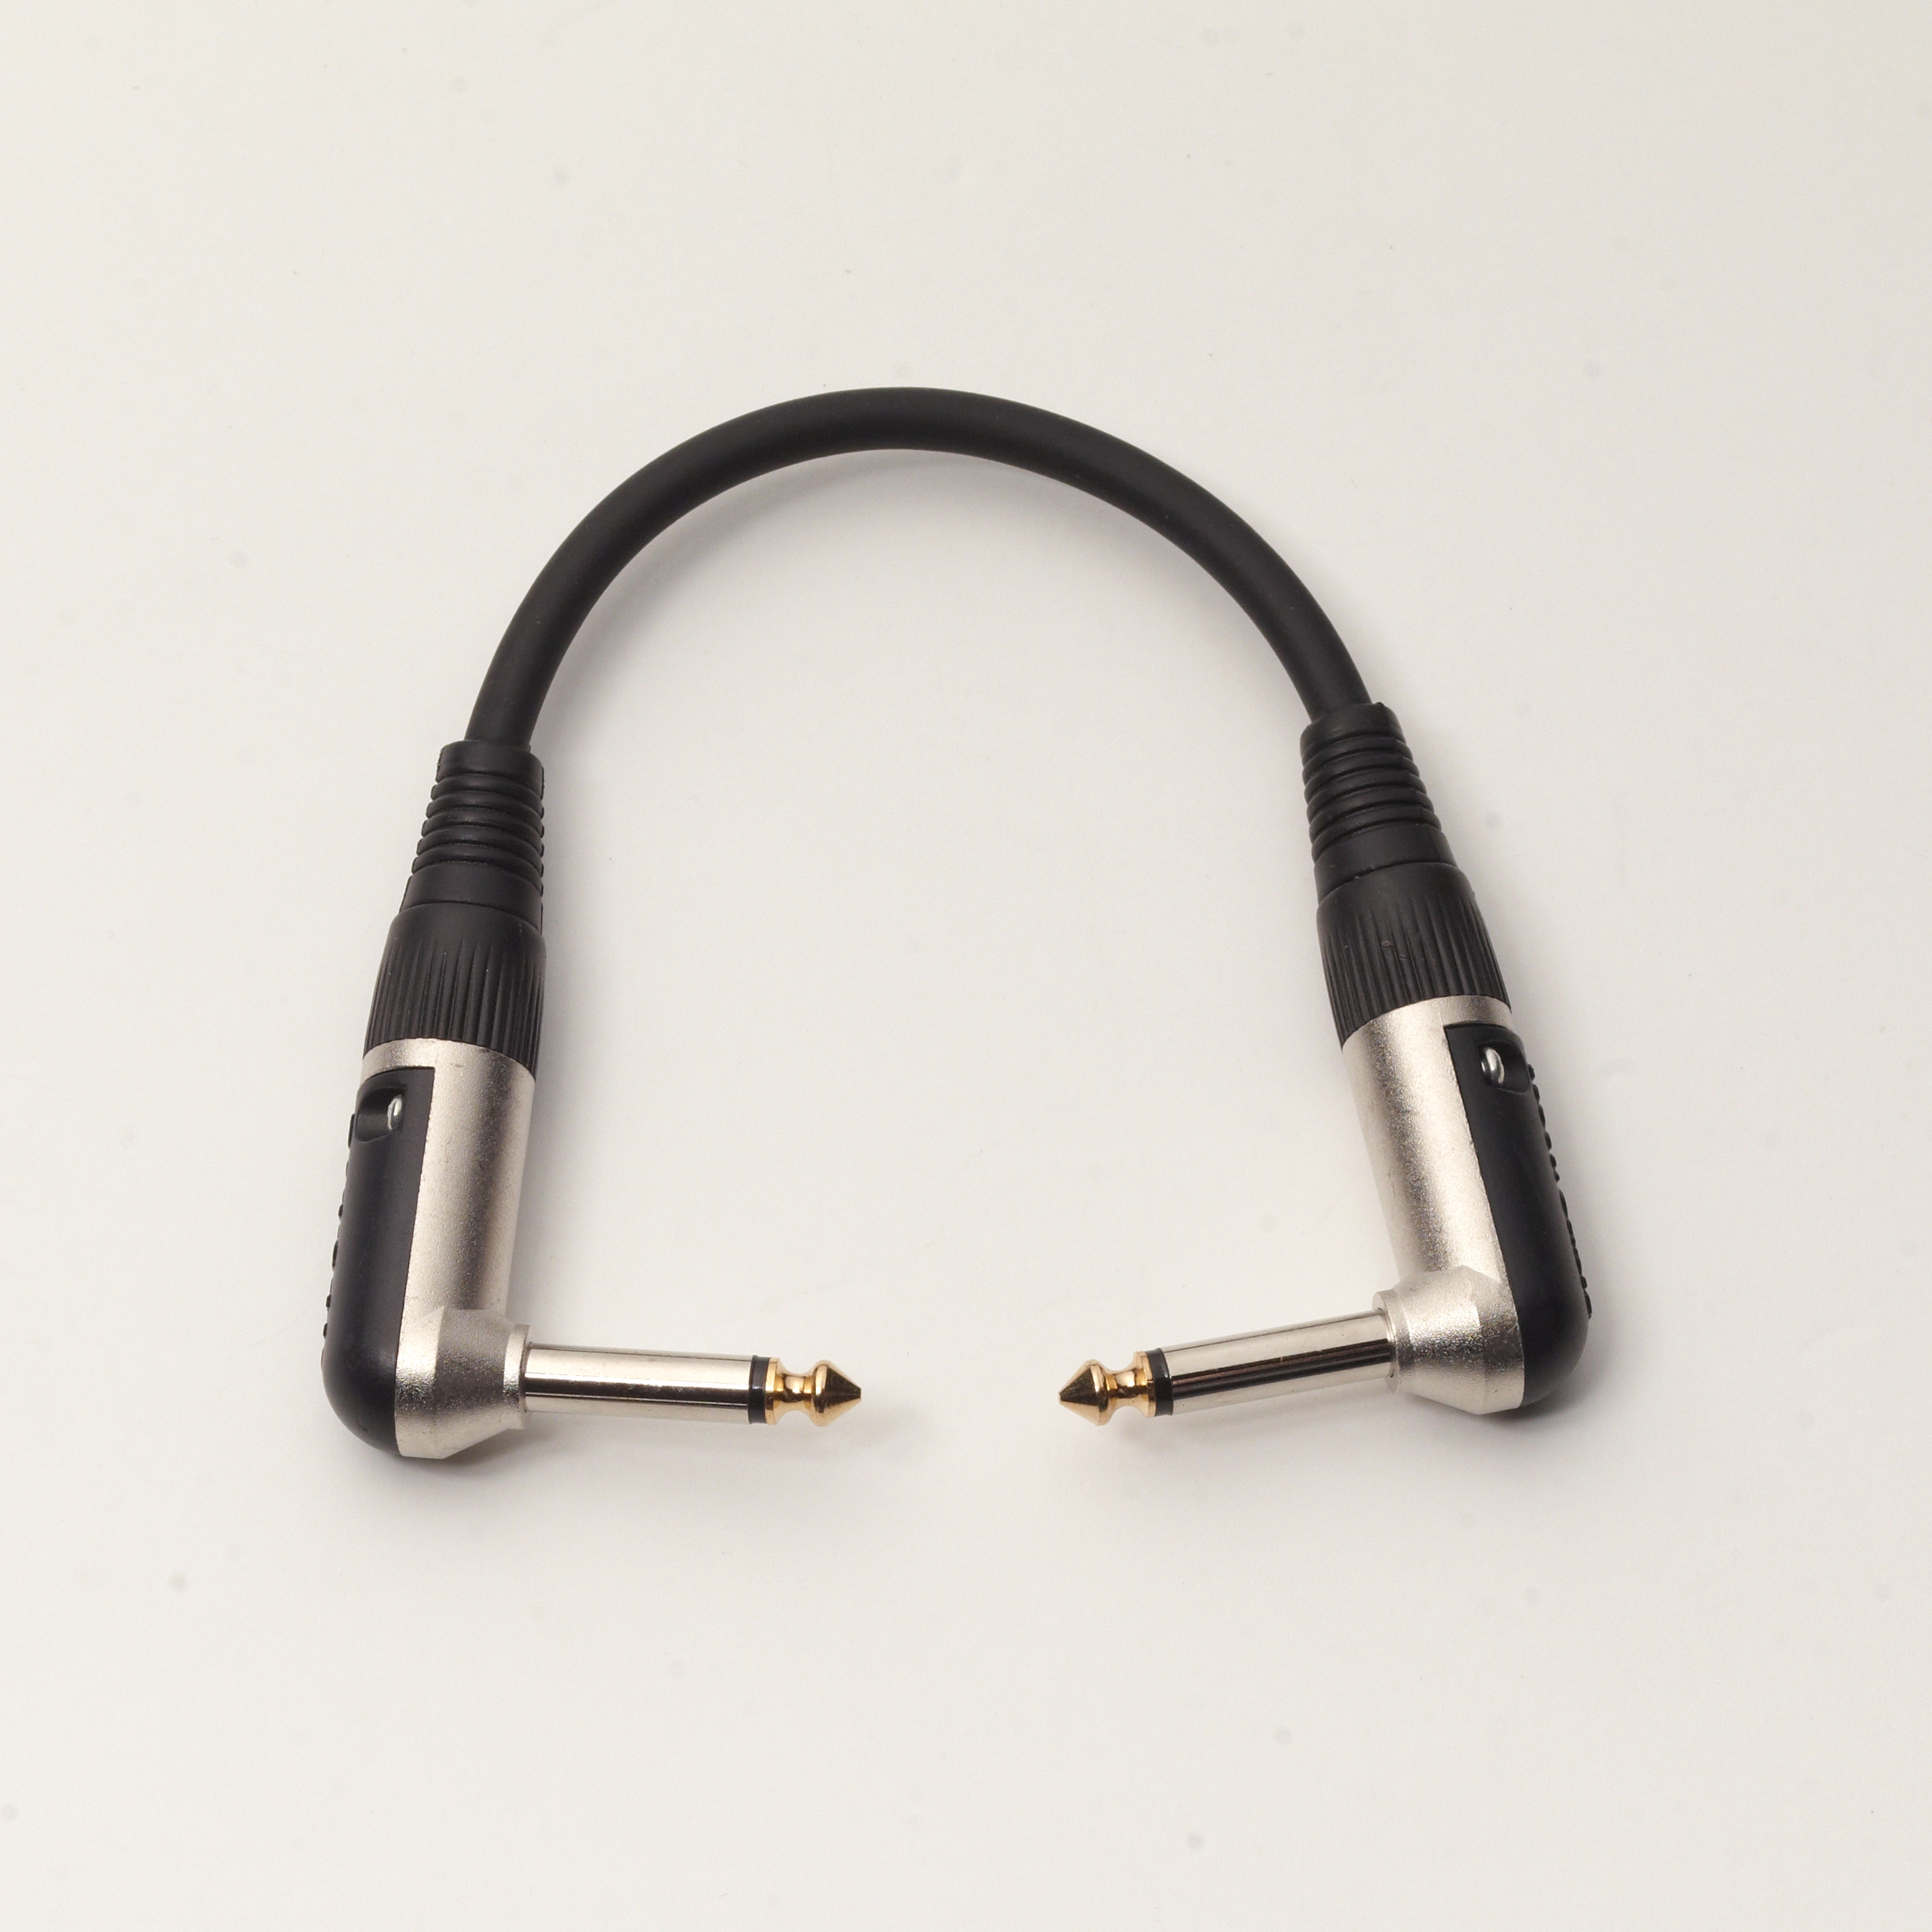 RockCable Patch Cable - angled TS (6.3 mm / 1/4") - 20 cm / 7.87"